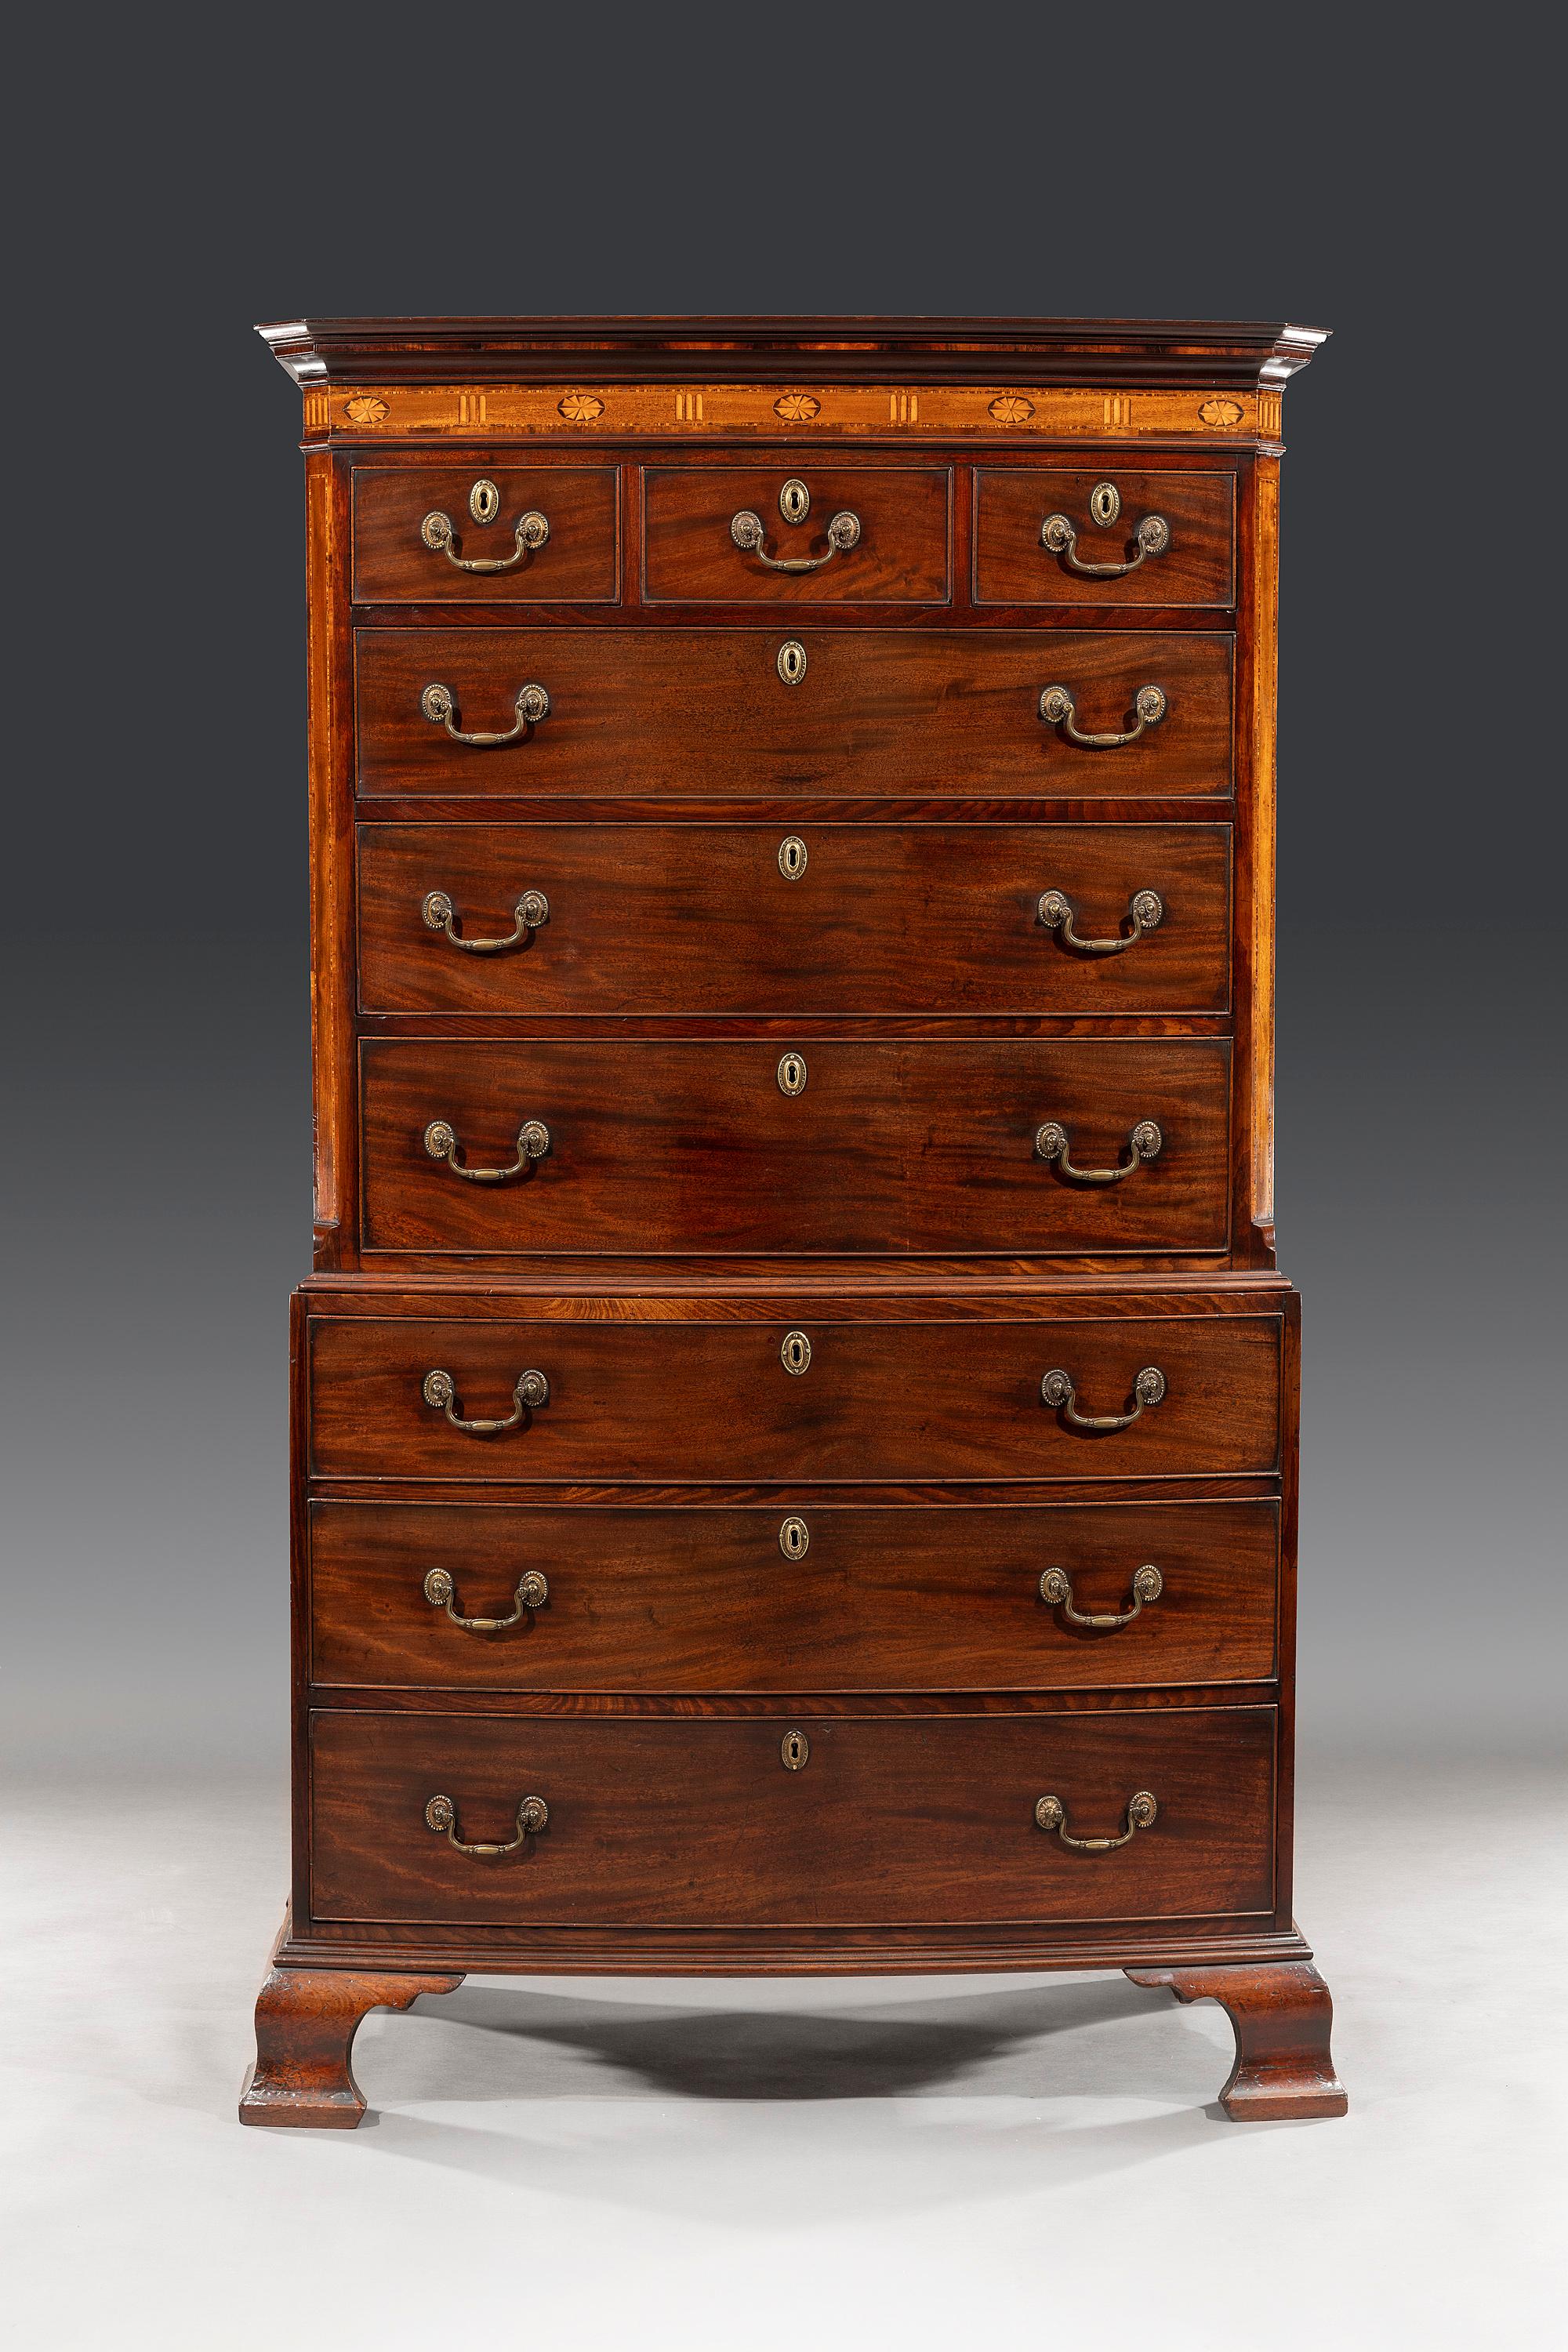 The chest on chest has a slender cornice with goncalo alves cross-banding and a bevelled moulding, above an inlaid frieze and boxwood fanned medallions, satinwood fluting and barber strung banding. The top section consists of three short and three